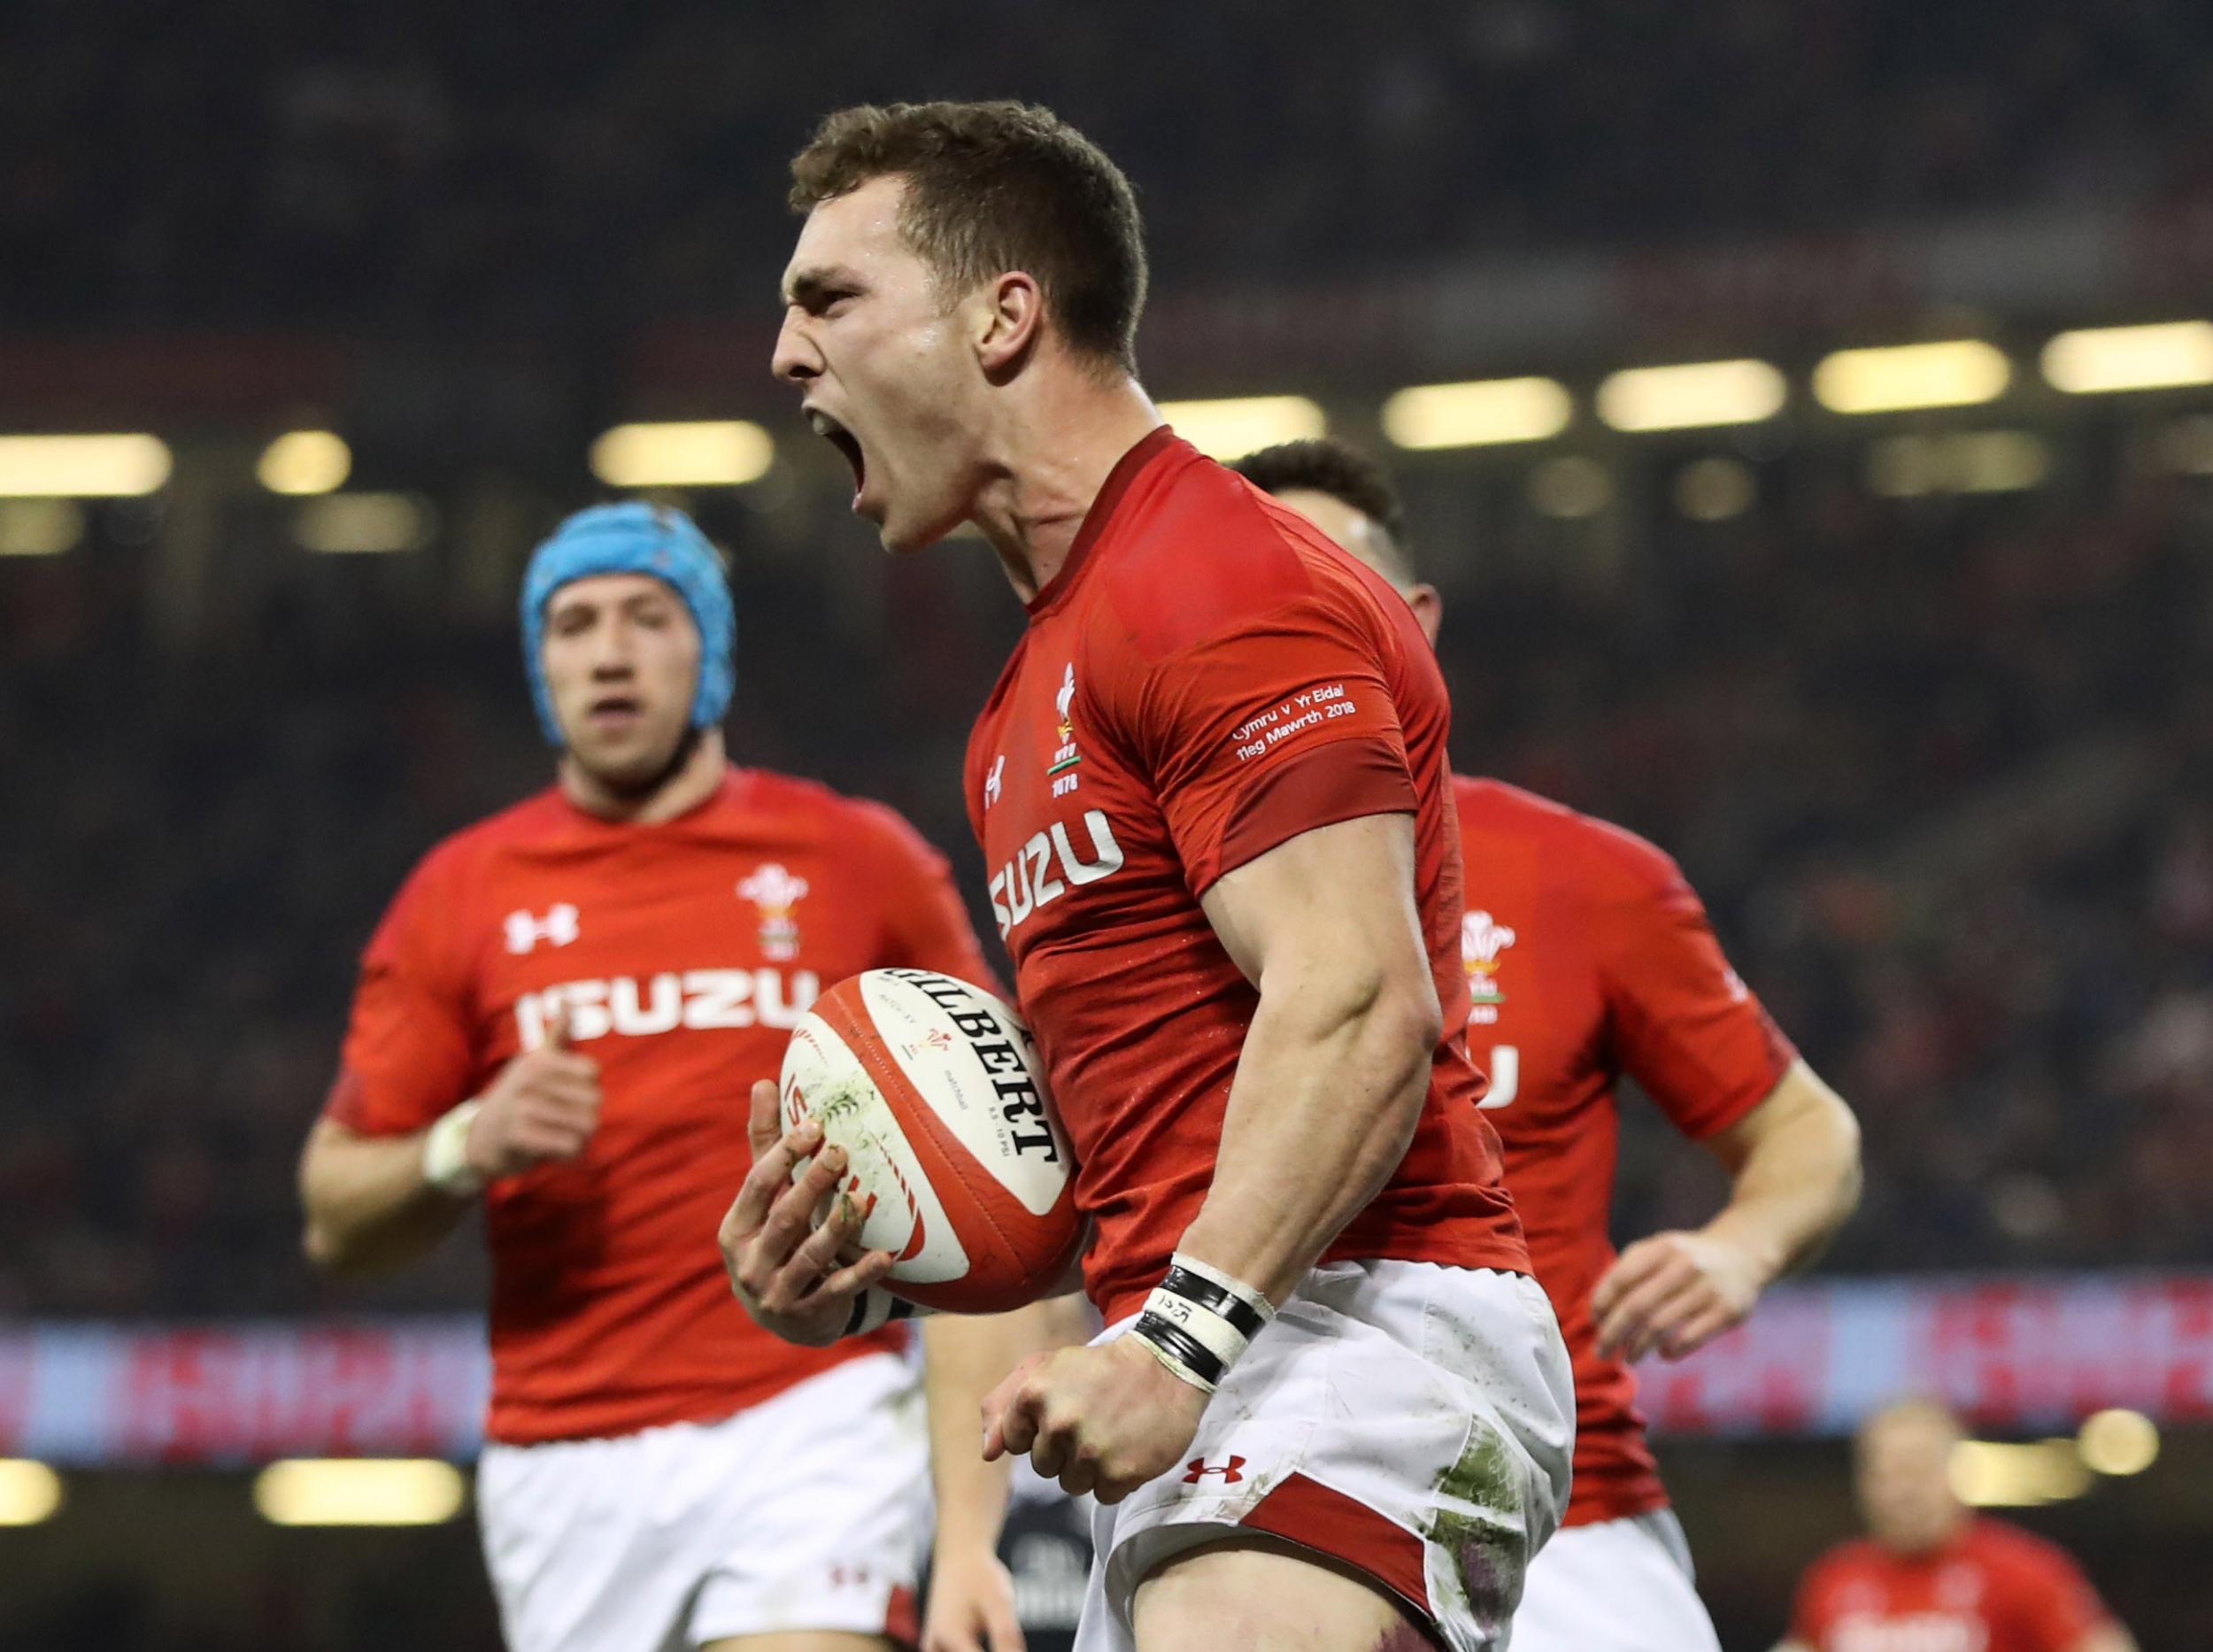 George North carried on his good form with two tries